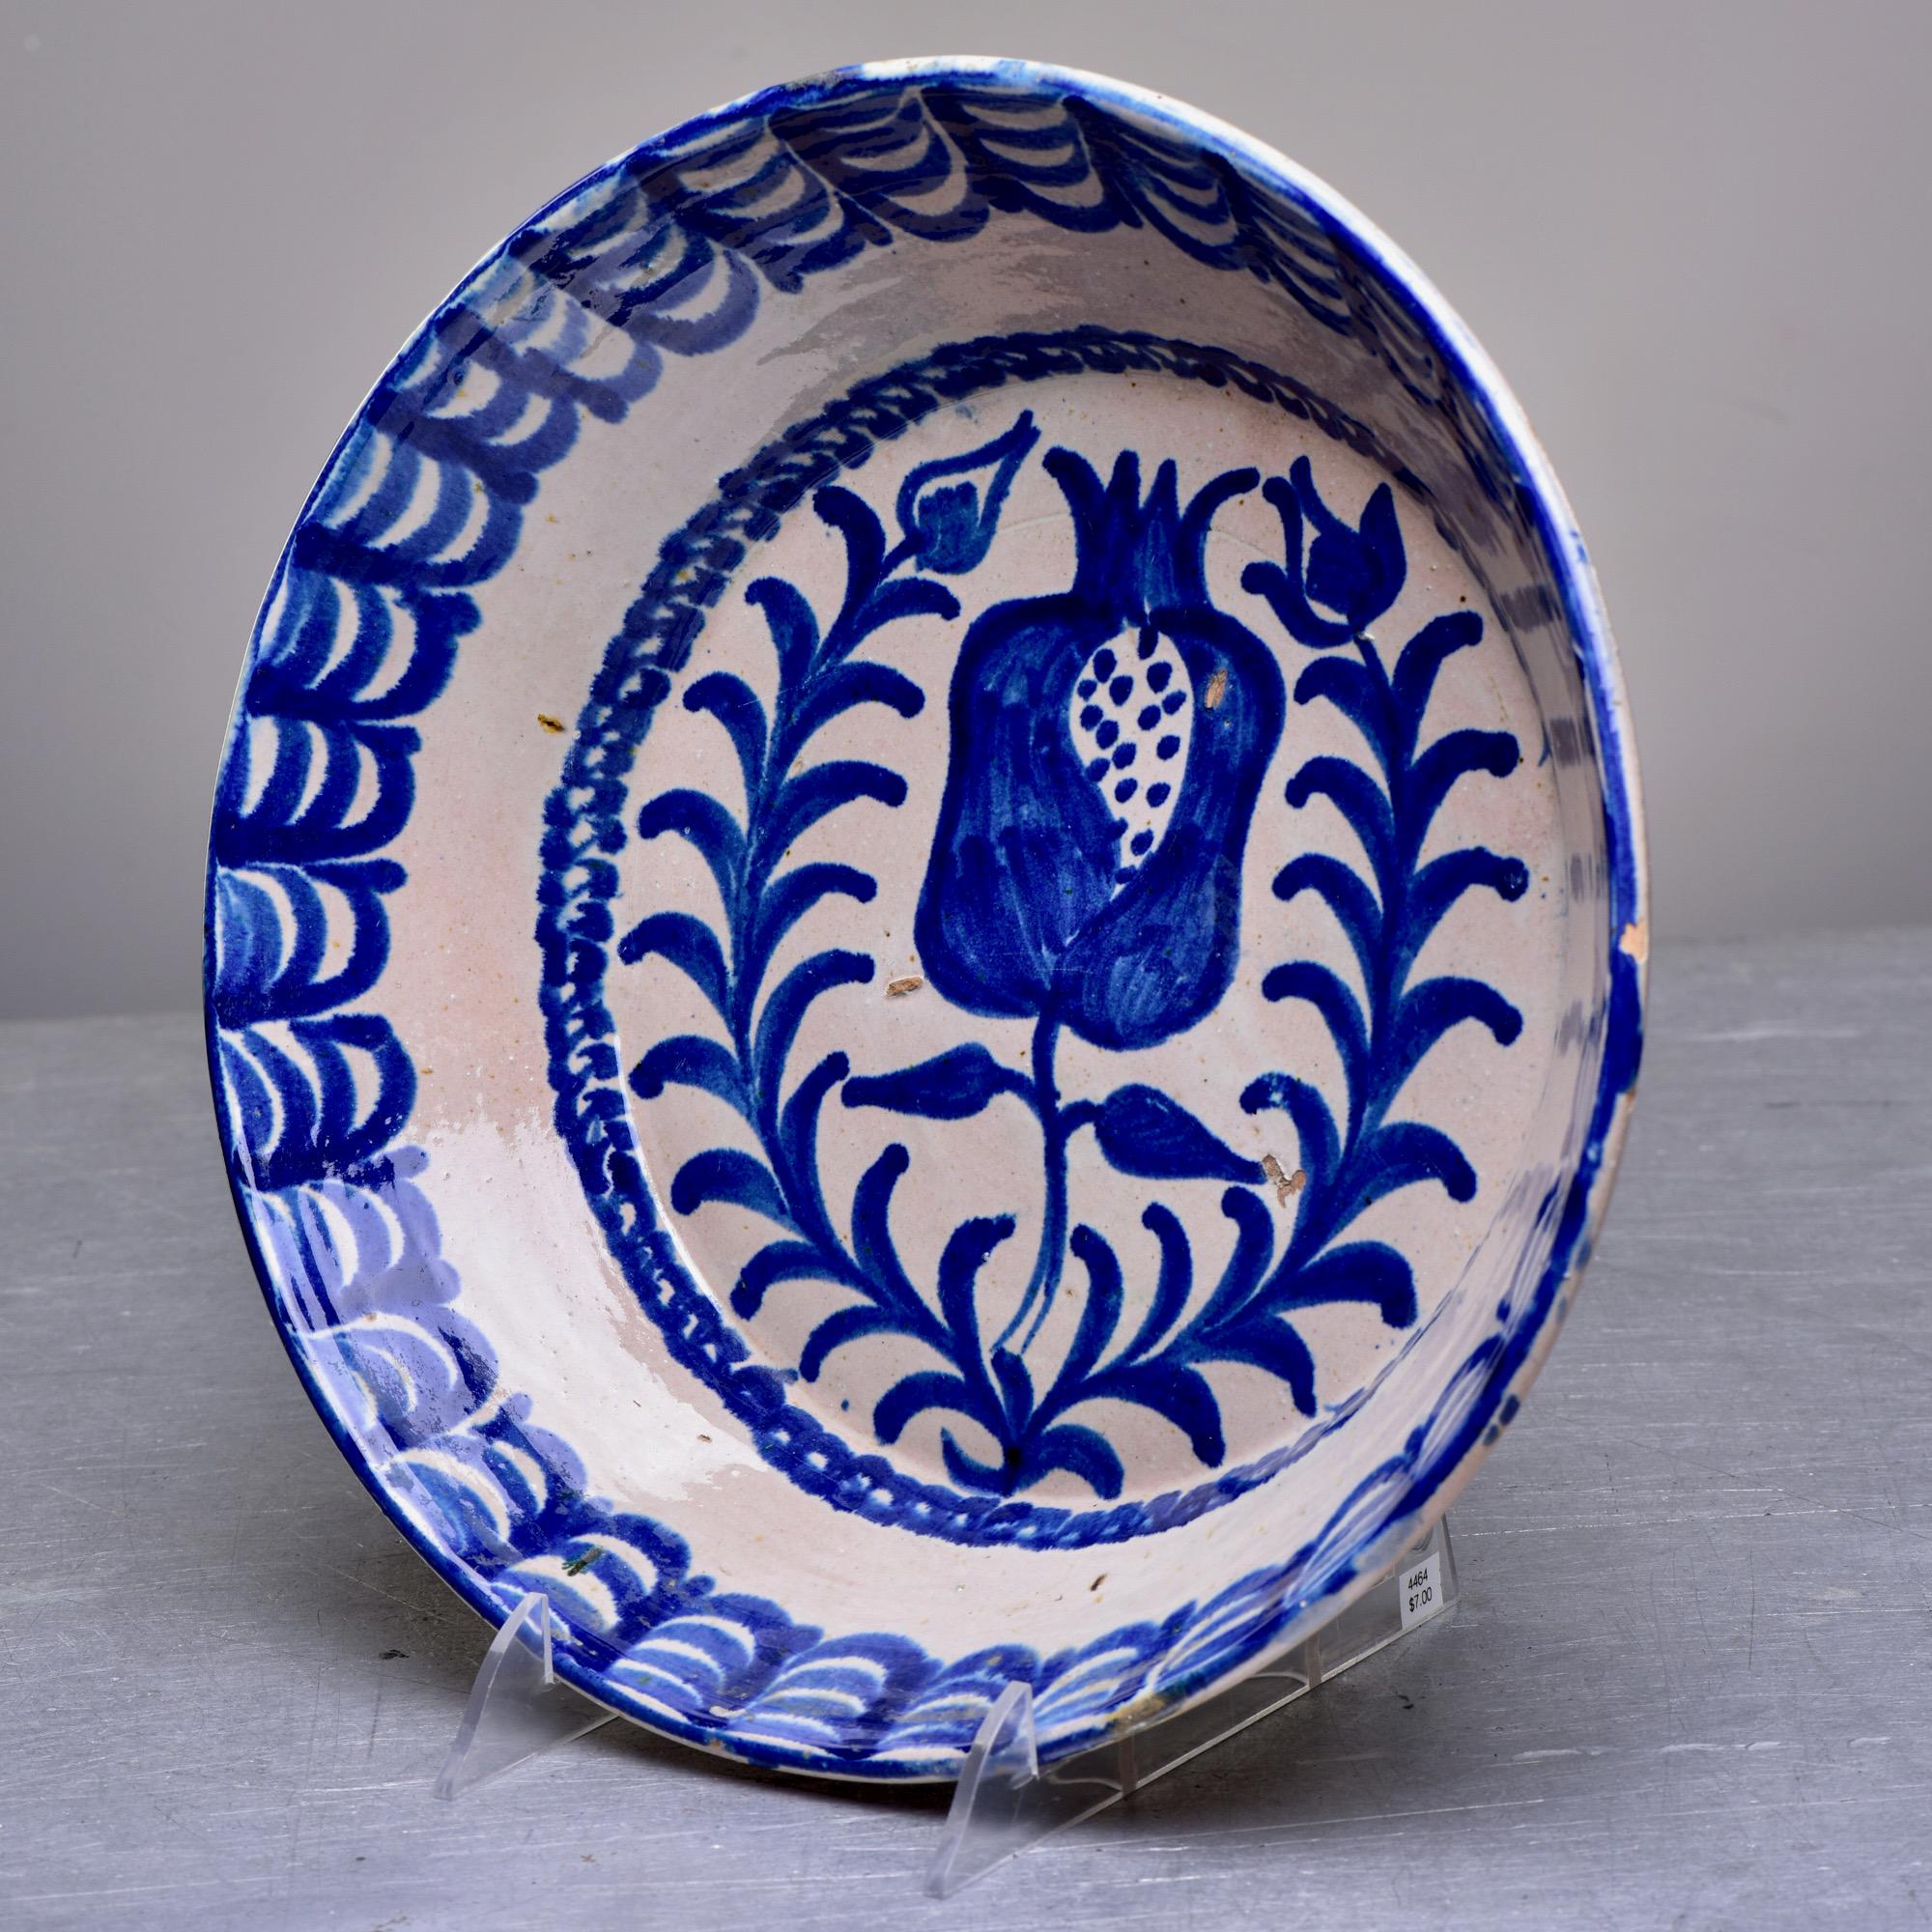 Circa 1890s Spanish Fajalauza terra cotta bowl in traditional blue and white glaze with pomegranate design. Fajalauza pottery is from Granada, Spain and originated during the 13-15th centuries when the Nasrid Muslim dynasty ruled the Iberian